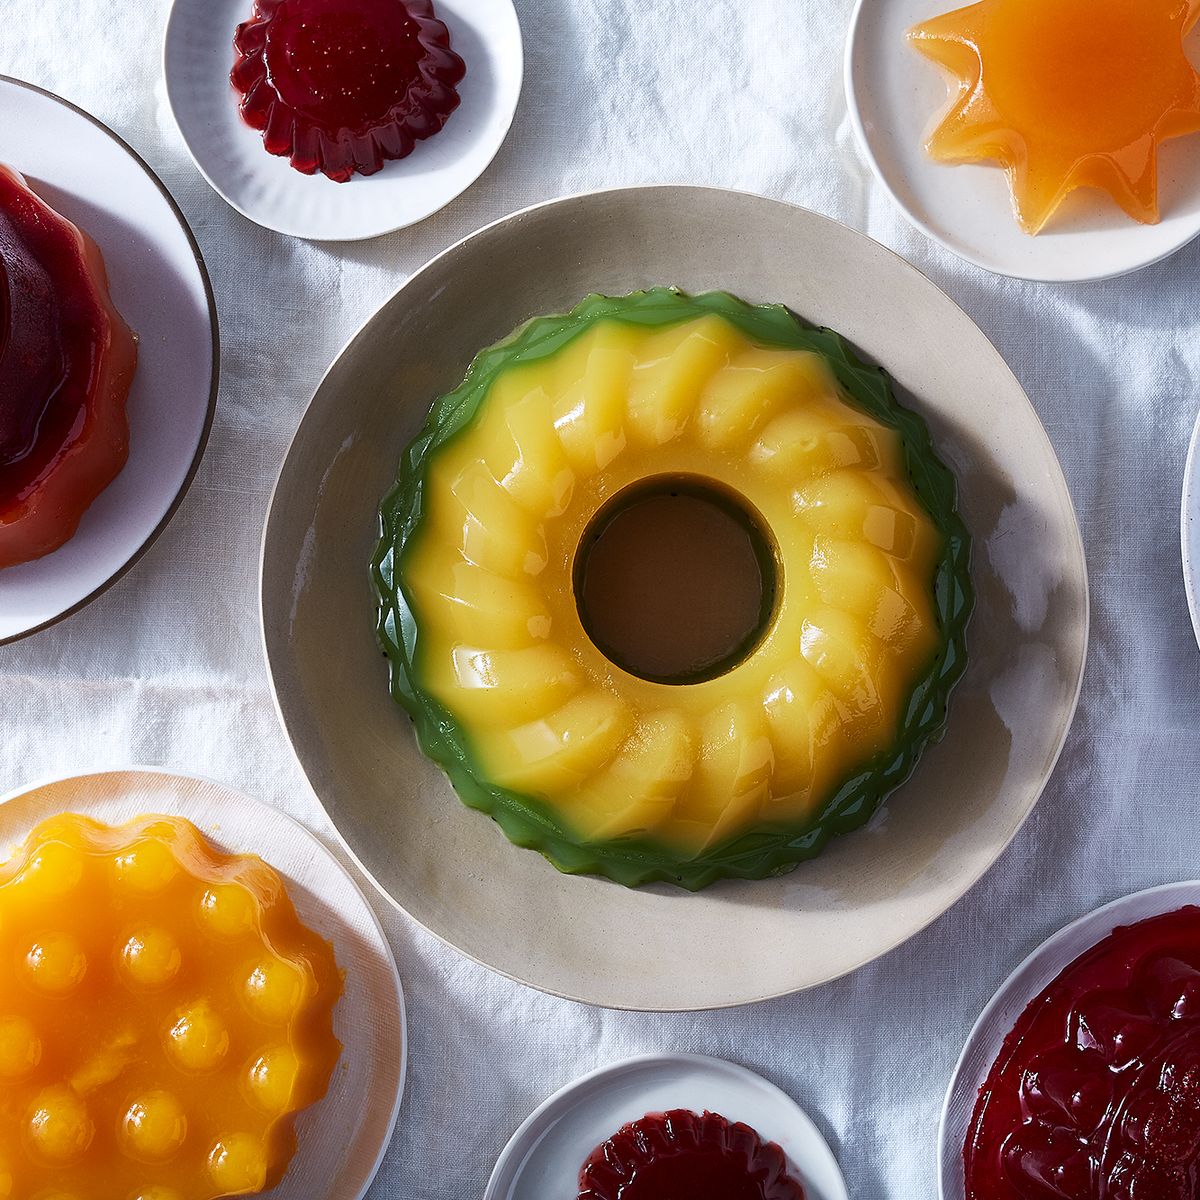 Let's Revitalize Jello—With Fresh Fruit and Fresh Perspective